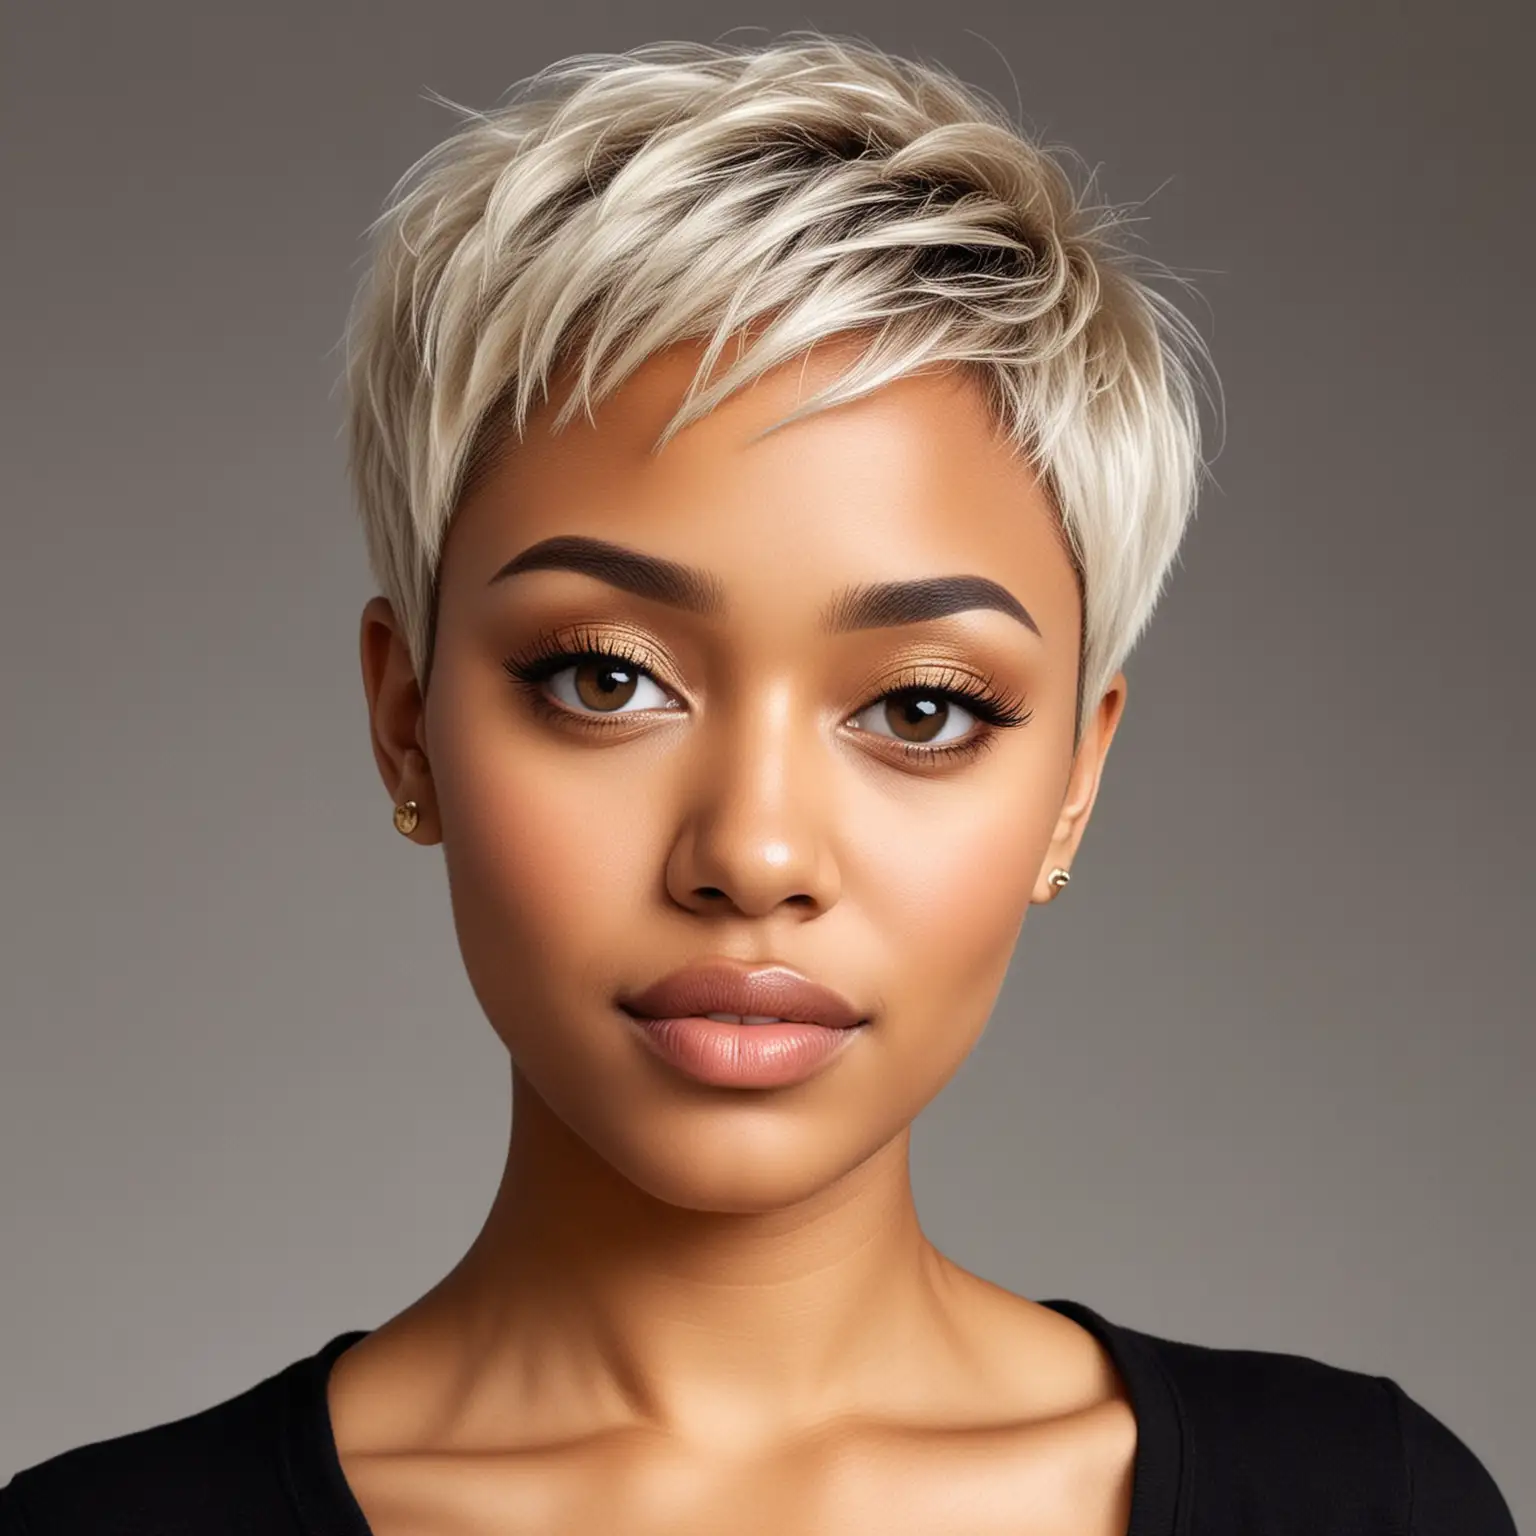 Elegant LightSkinned Black Woman with Pixie Cut and Gray Eyes